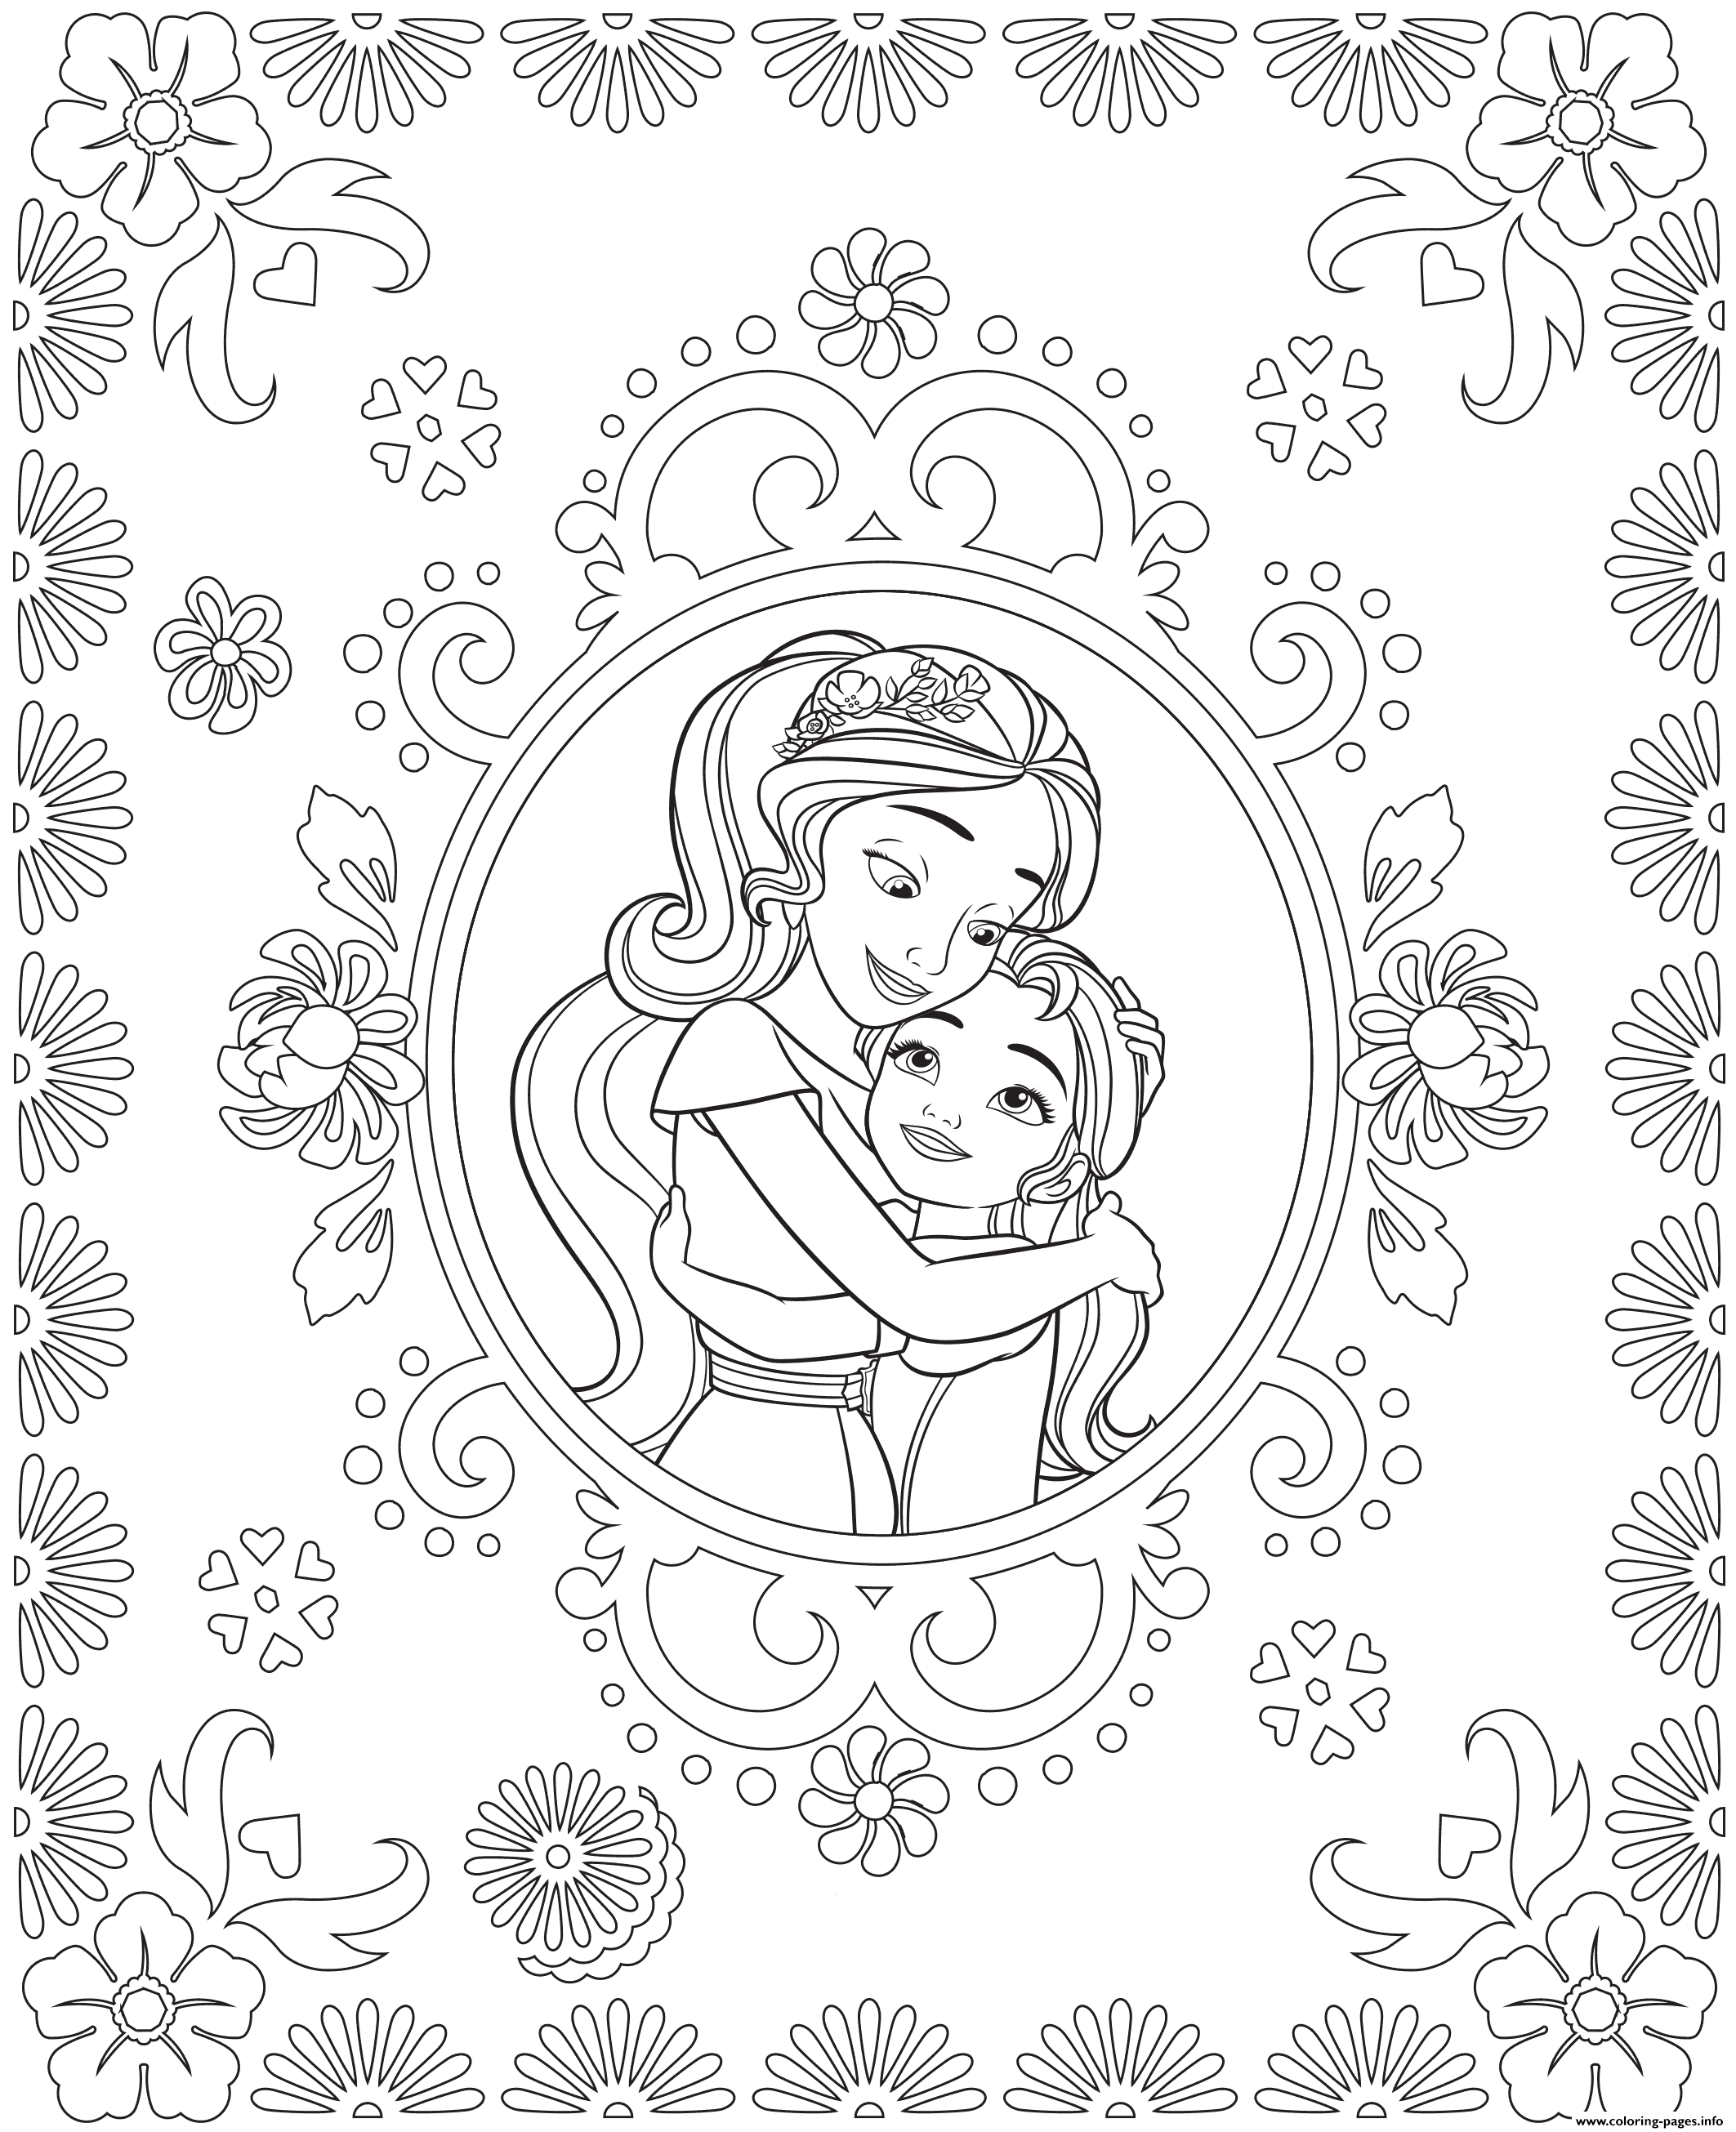 Print Princess Elena of Avalor and Sister Isabel Colouring Page coloring pages